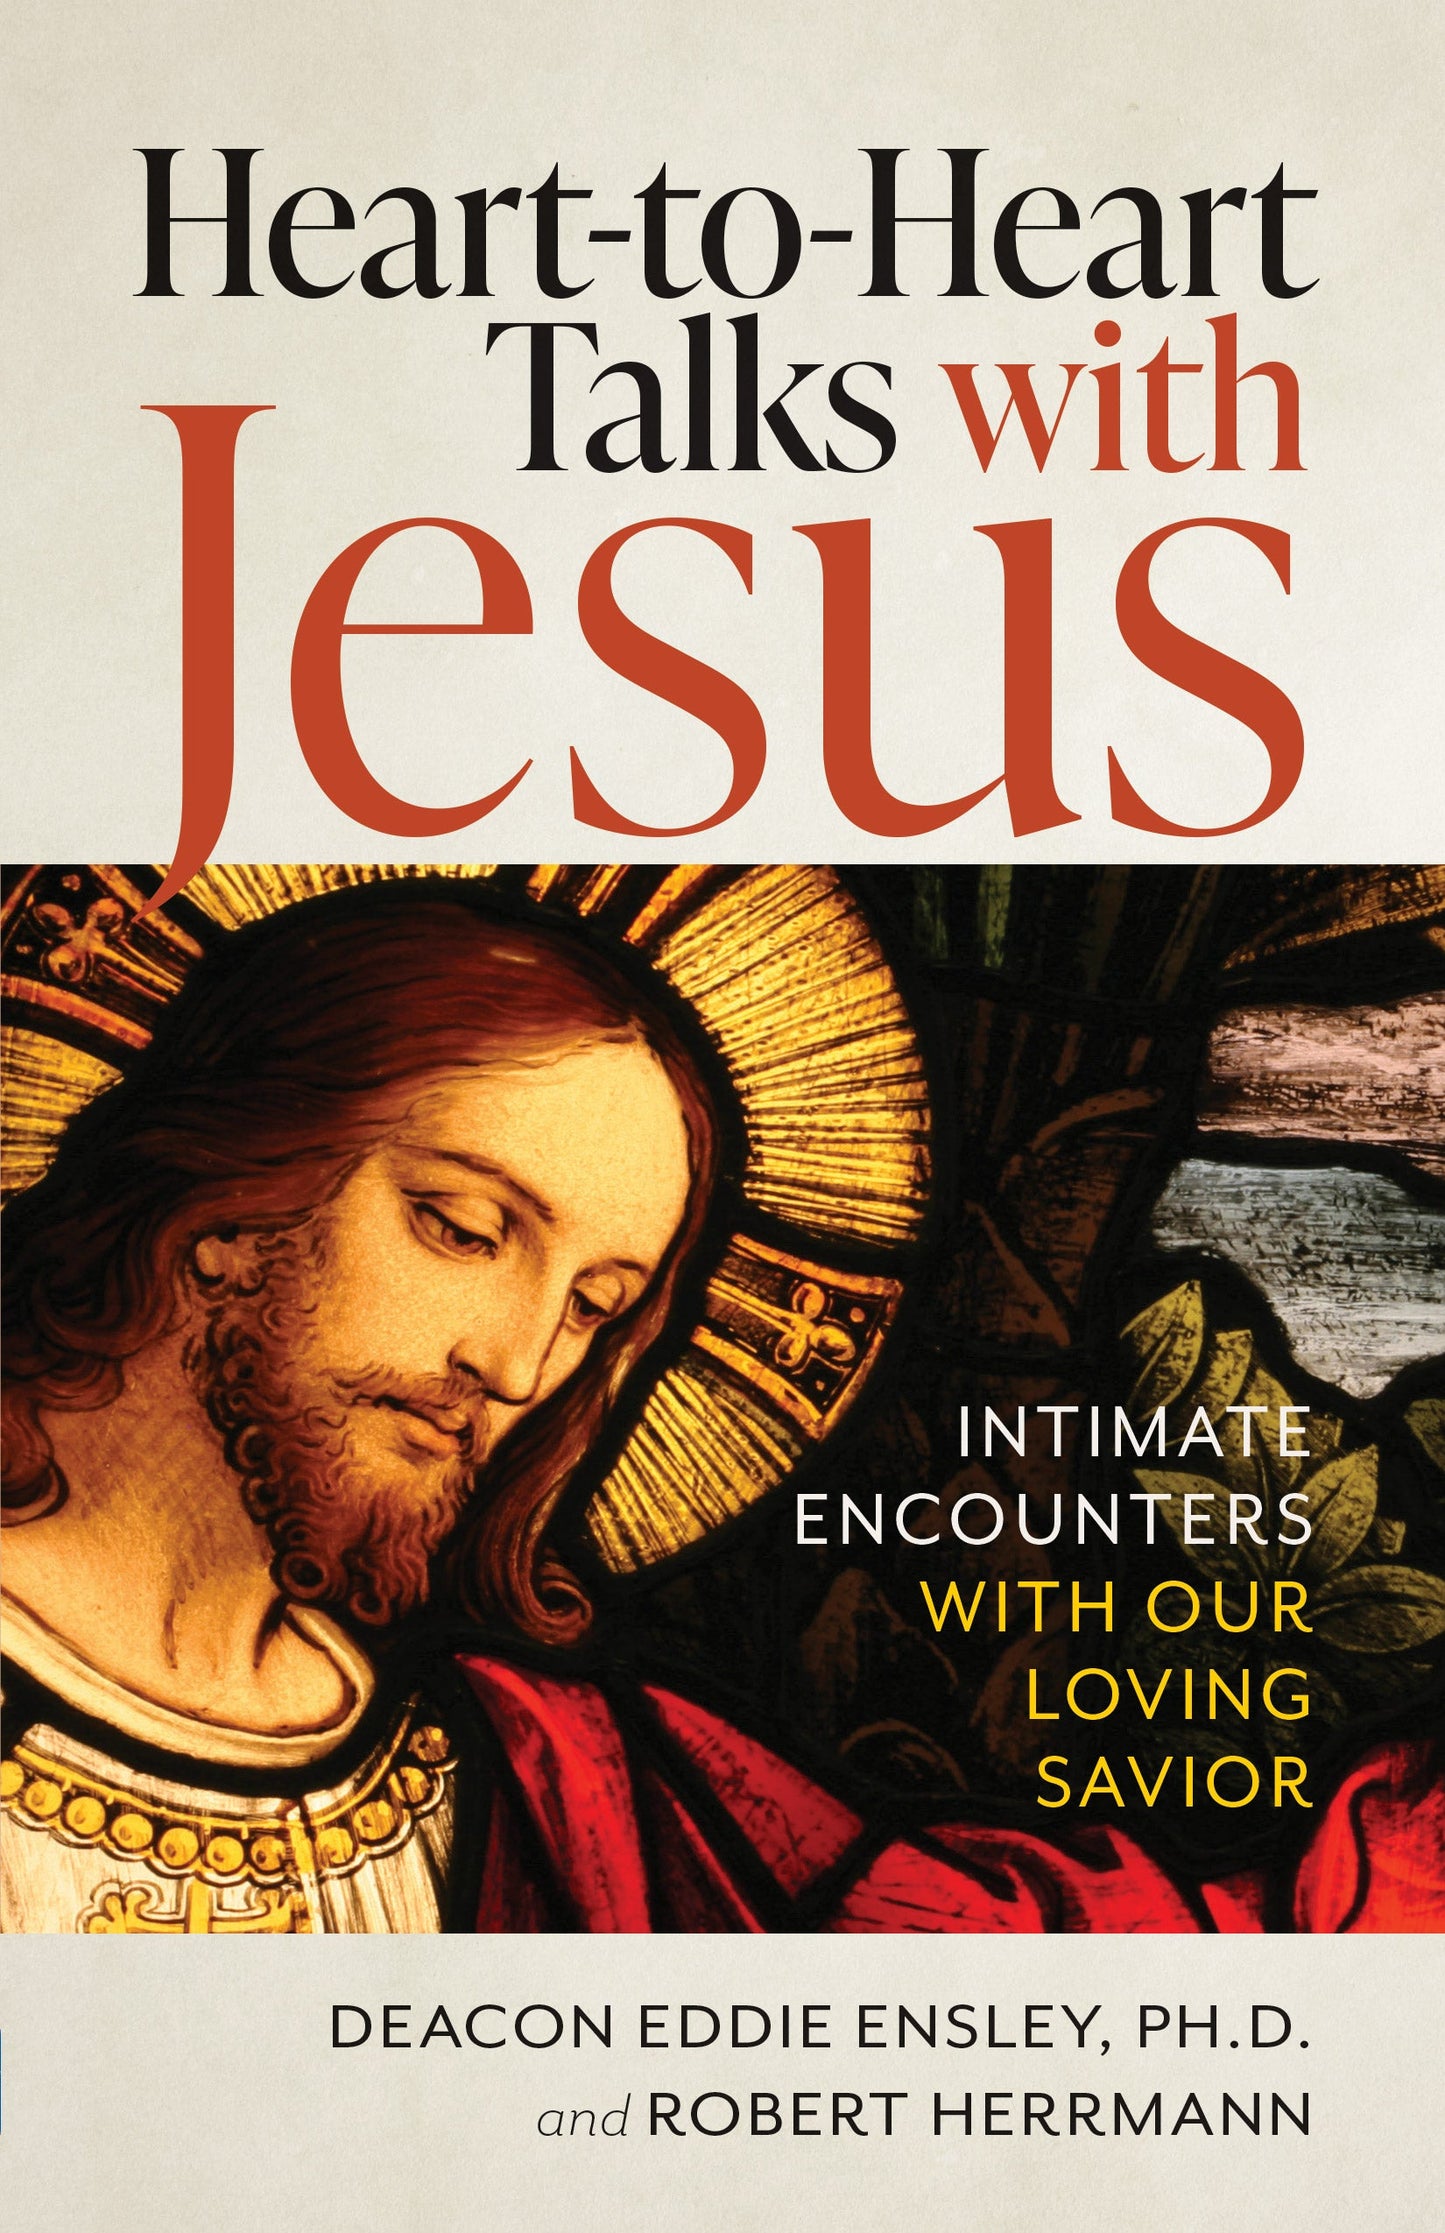 Heart-to-Heart Talks with Jesus